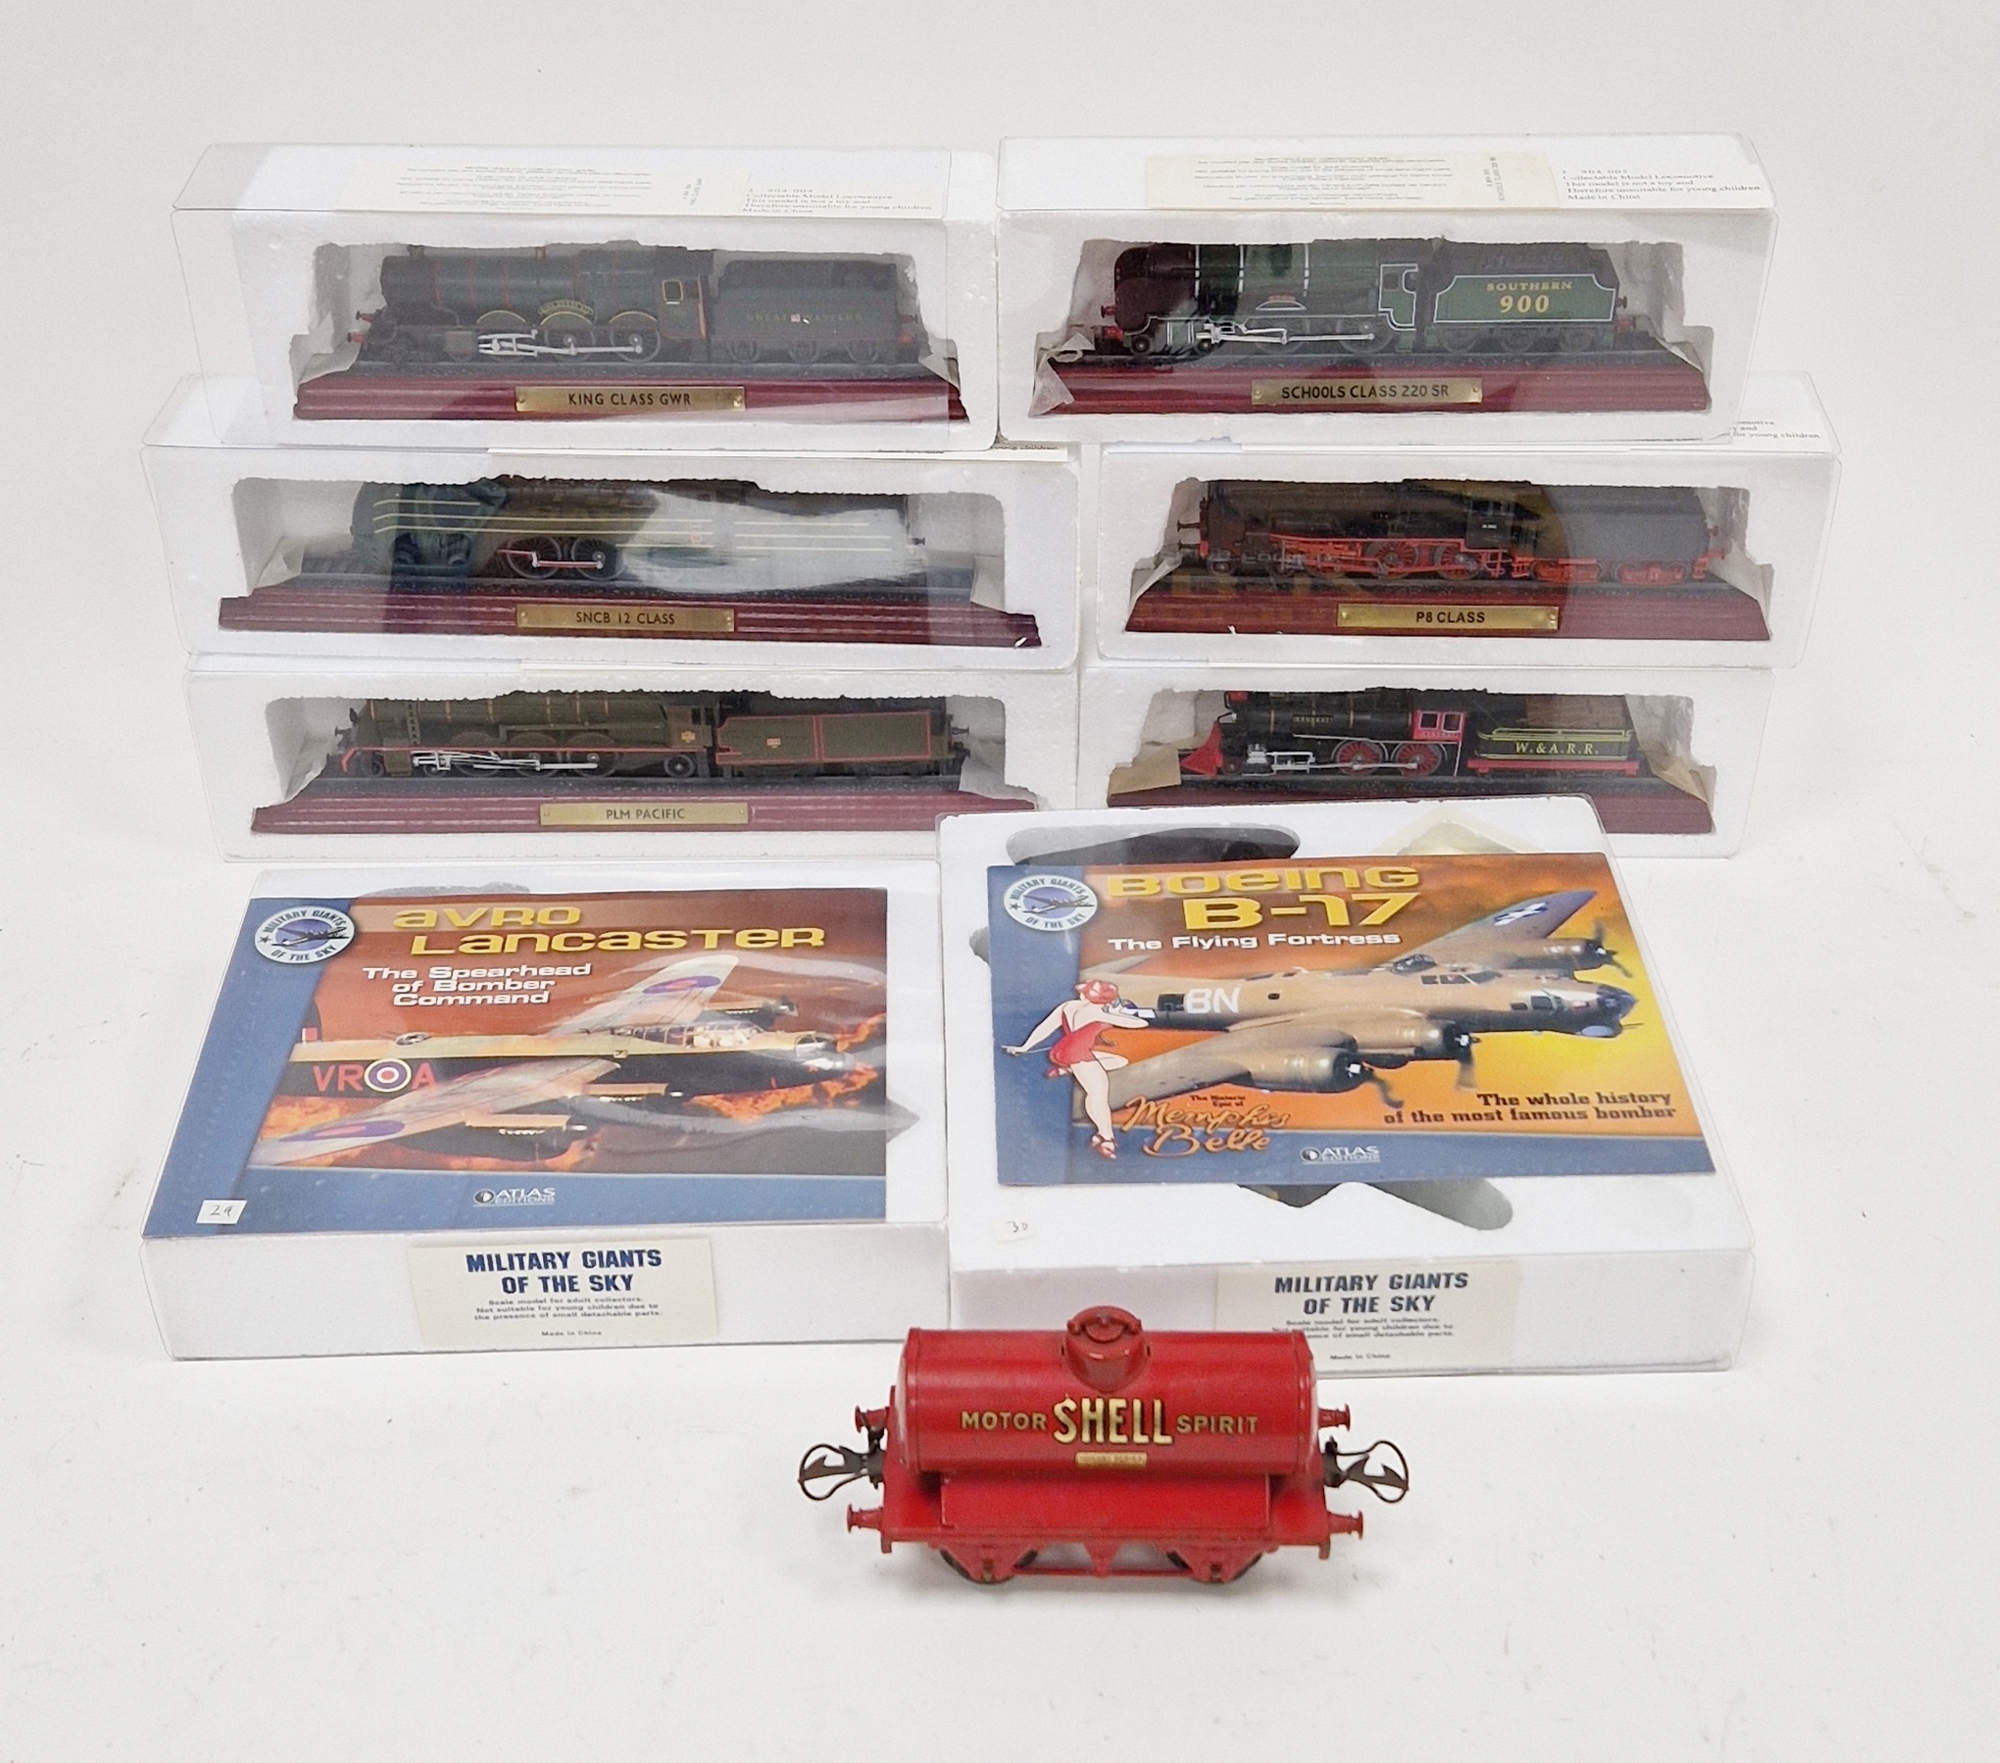 Boxed atlas edition 'Avro Lancaster', Boeing B17, models of trains, collectable model locomotive